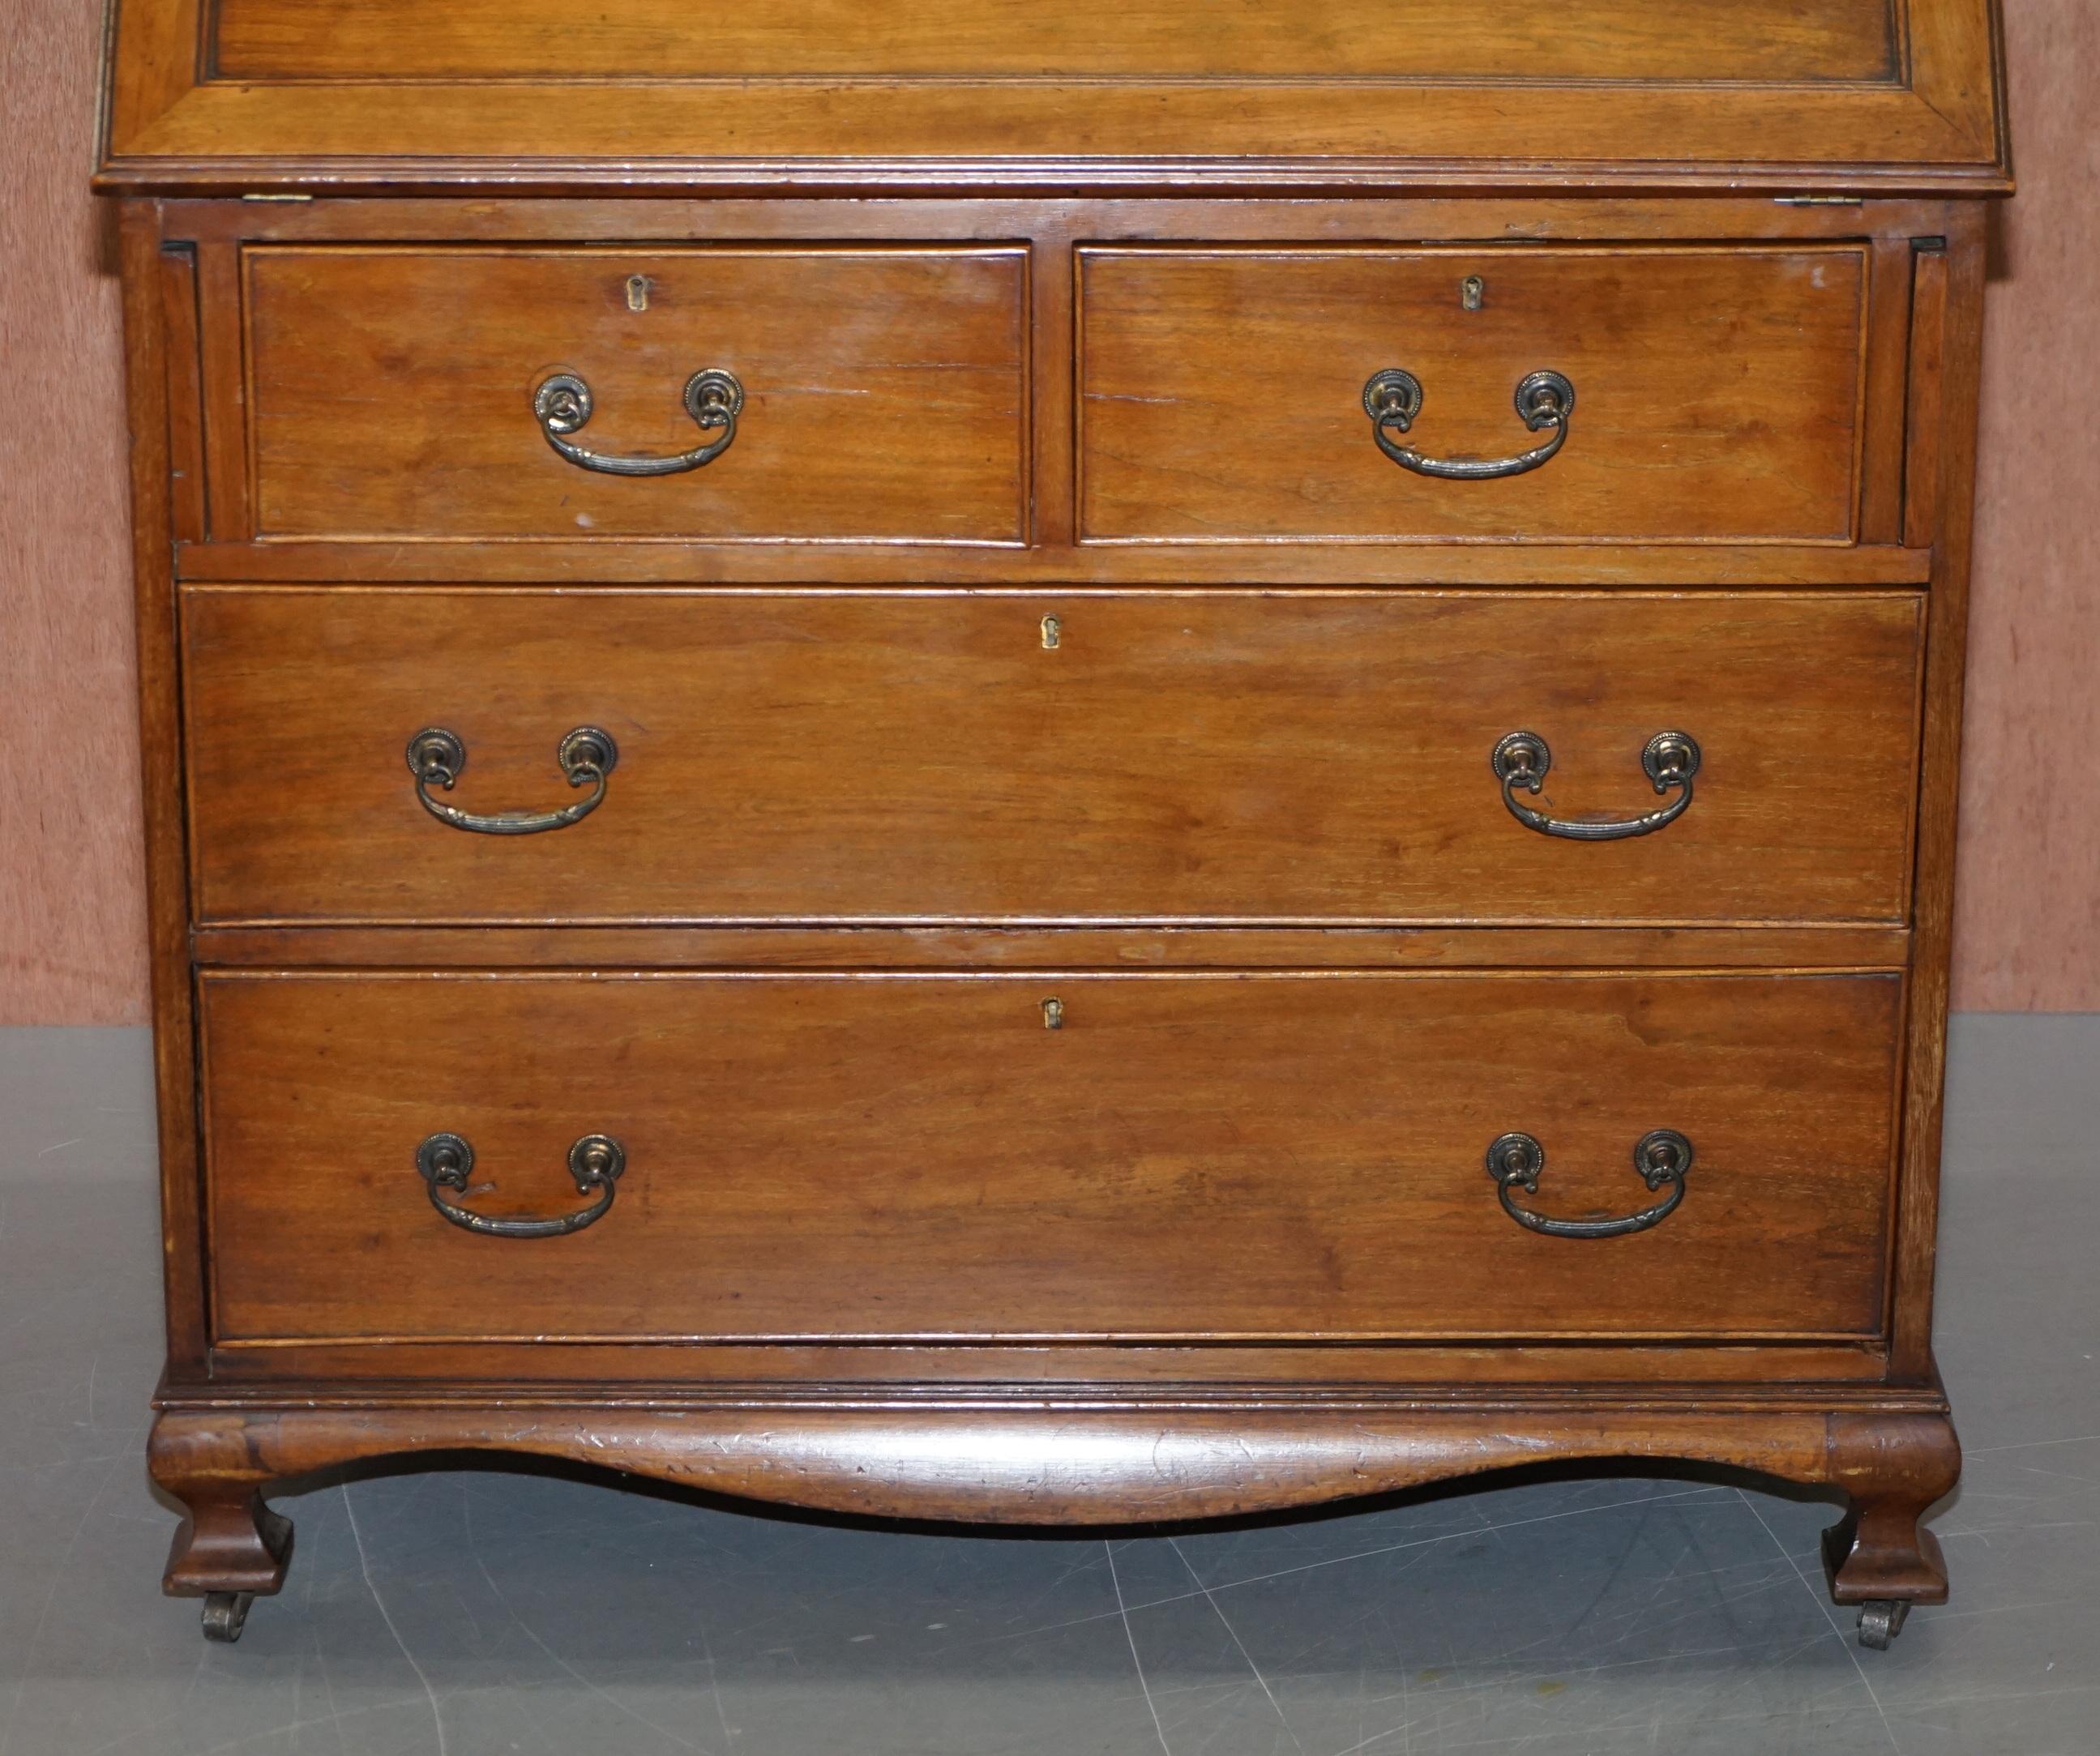 Lovely circa 1900 Solid Walnut Writing Bureau Chest of Drawers with Desk Top 1